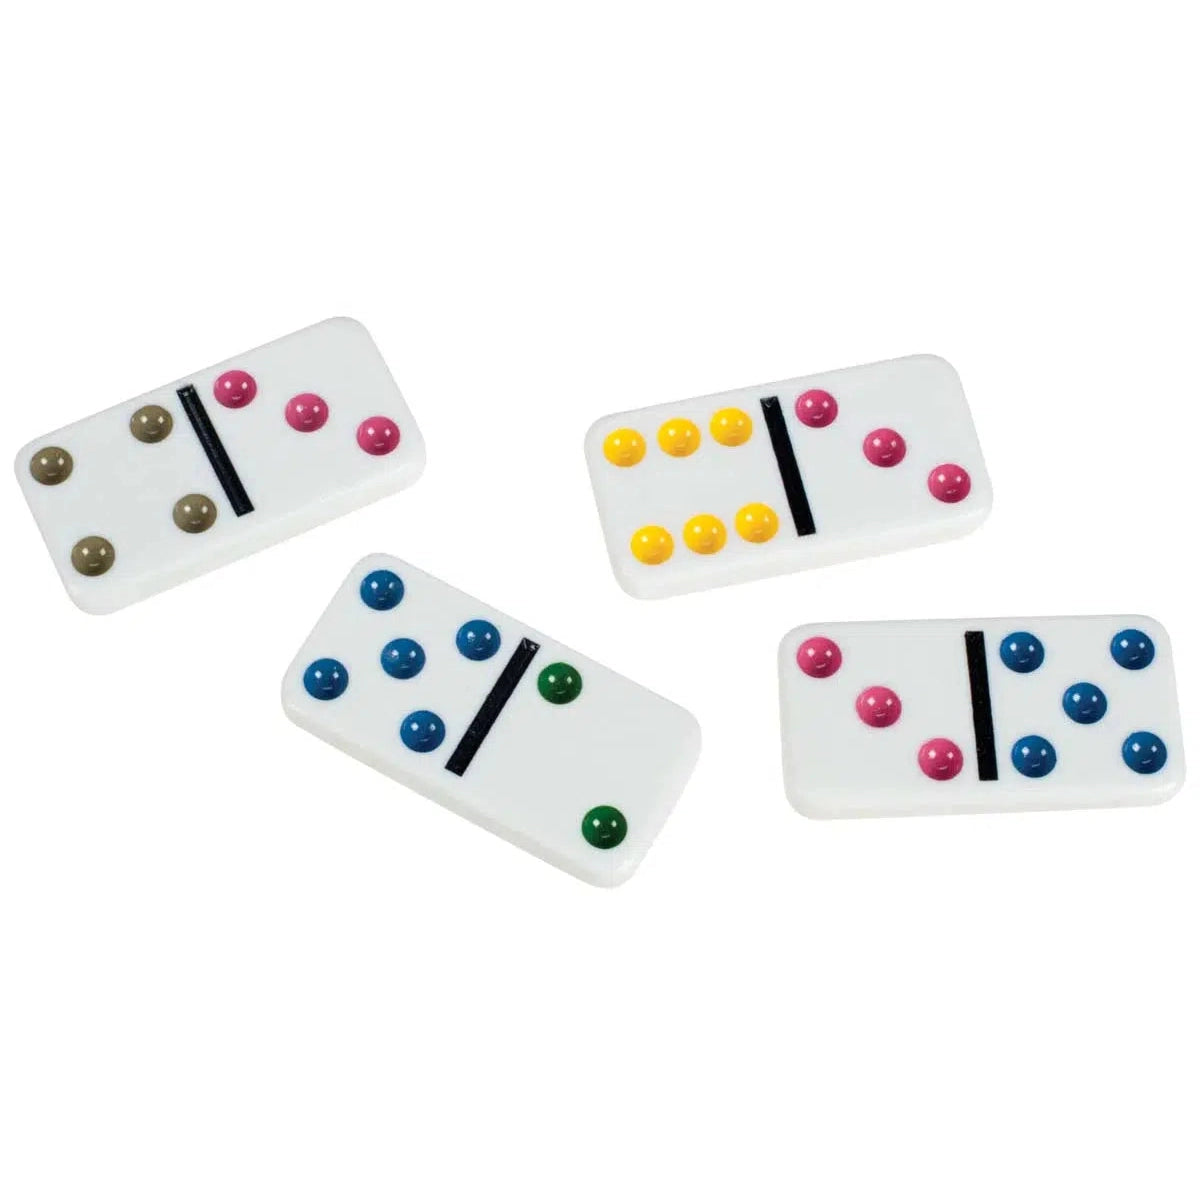 Front view of Double 6 Dominoes in their tin.